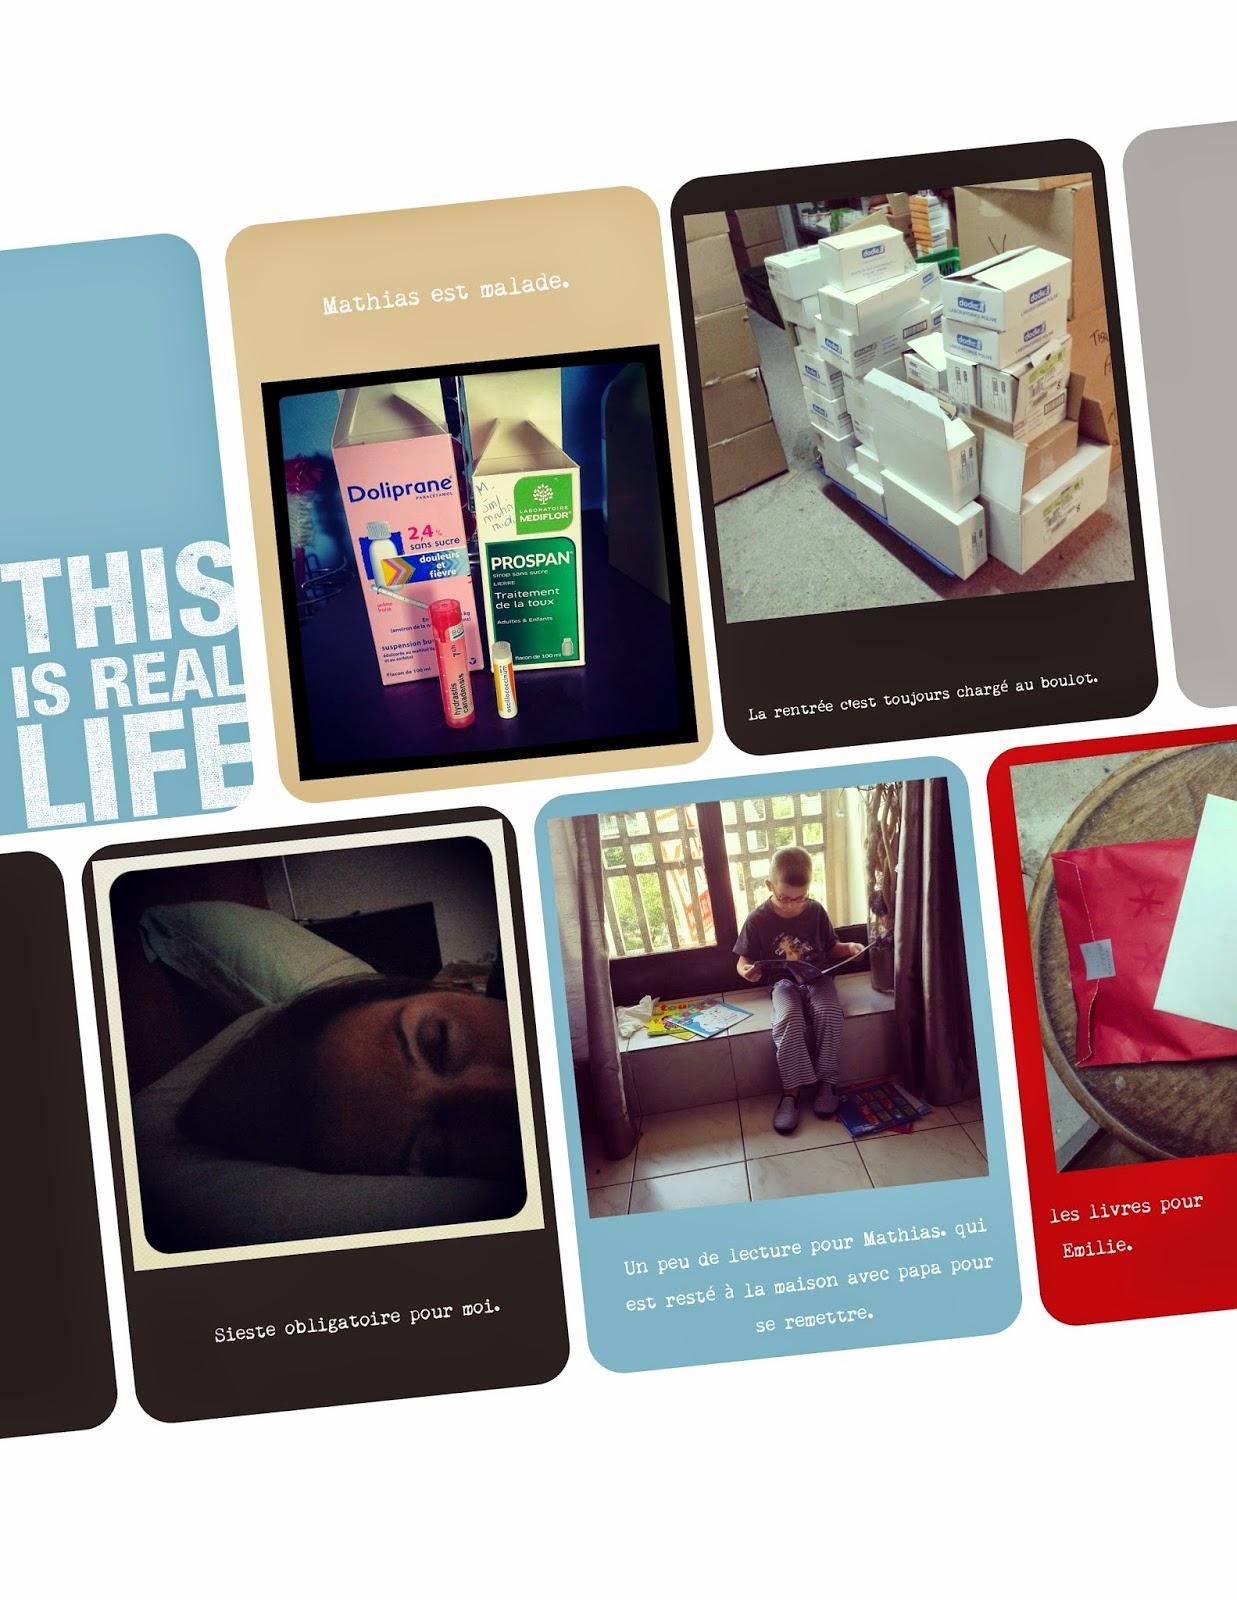 My Week in a Life 2013